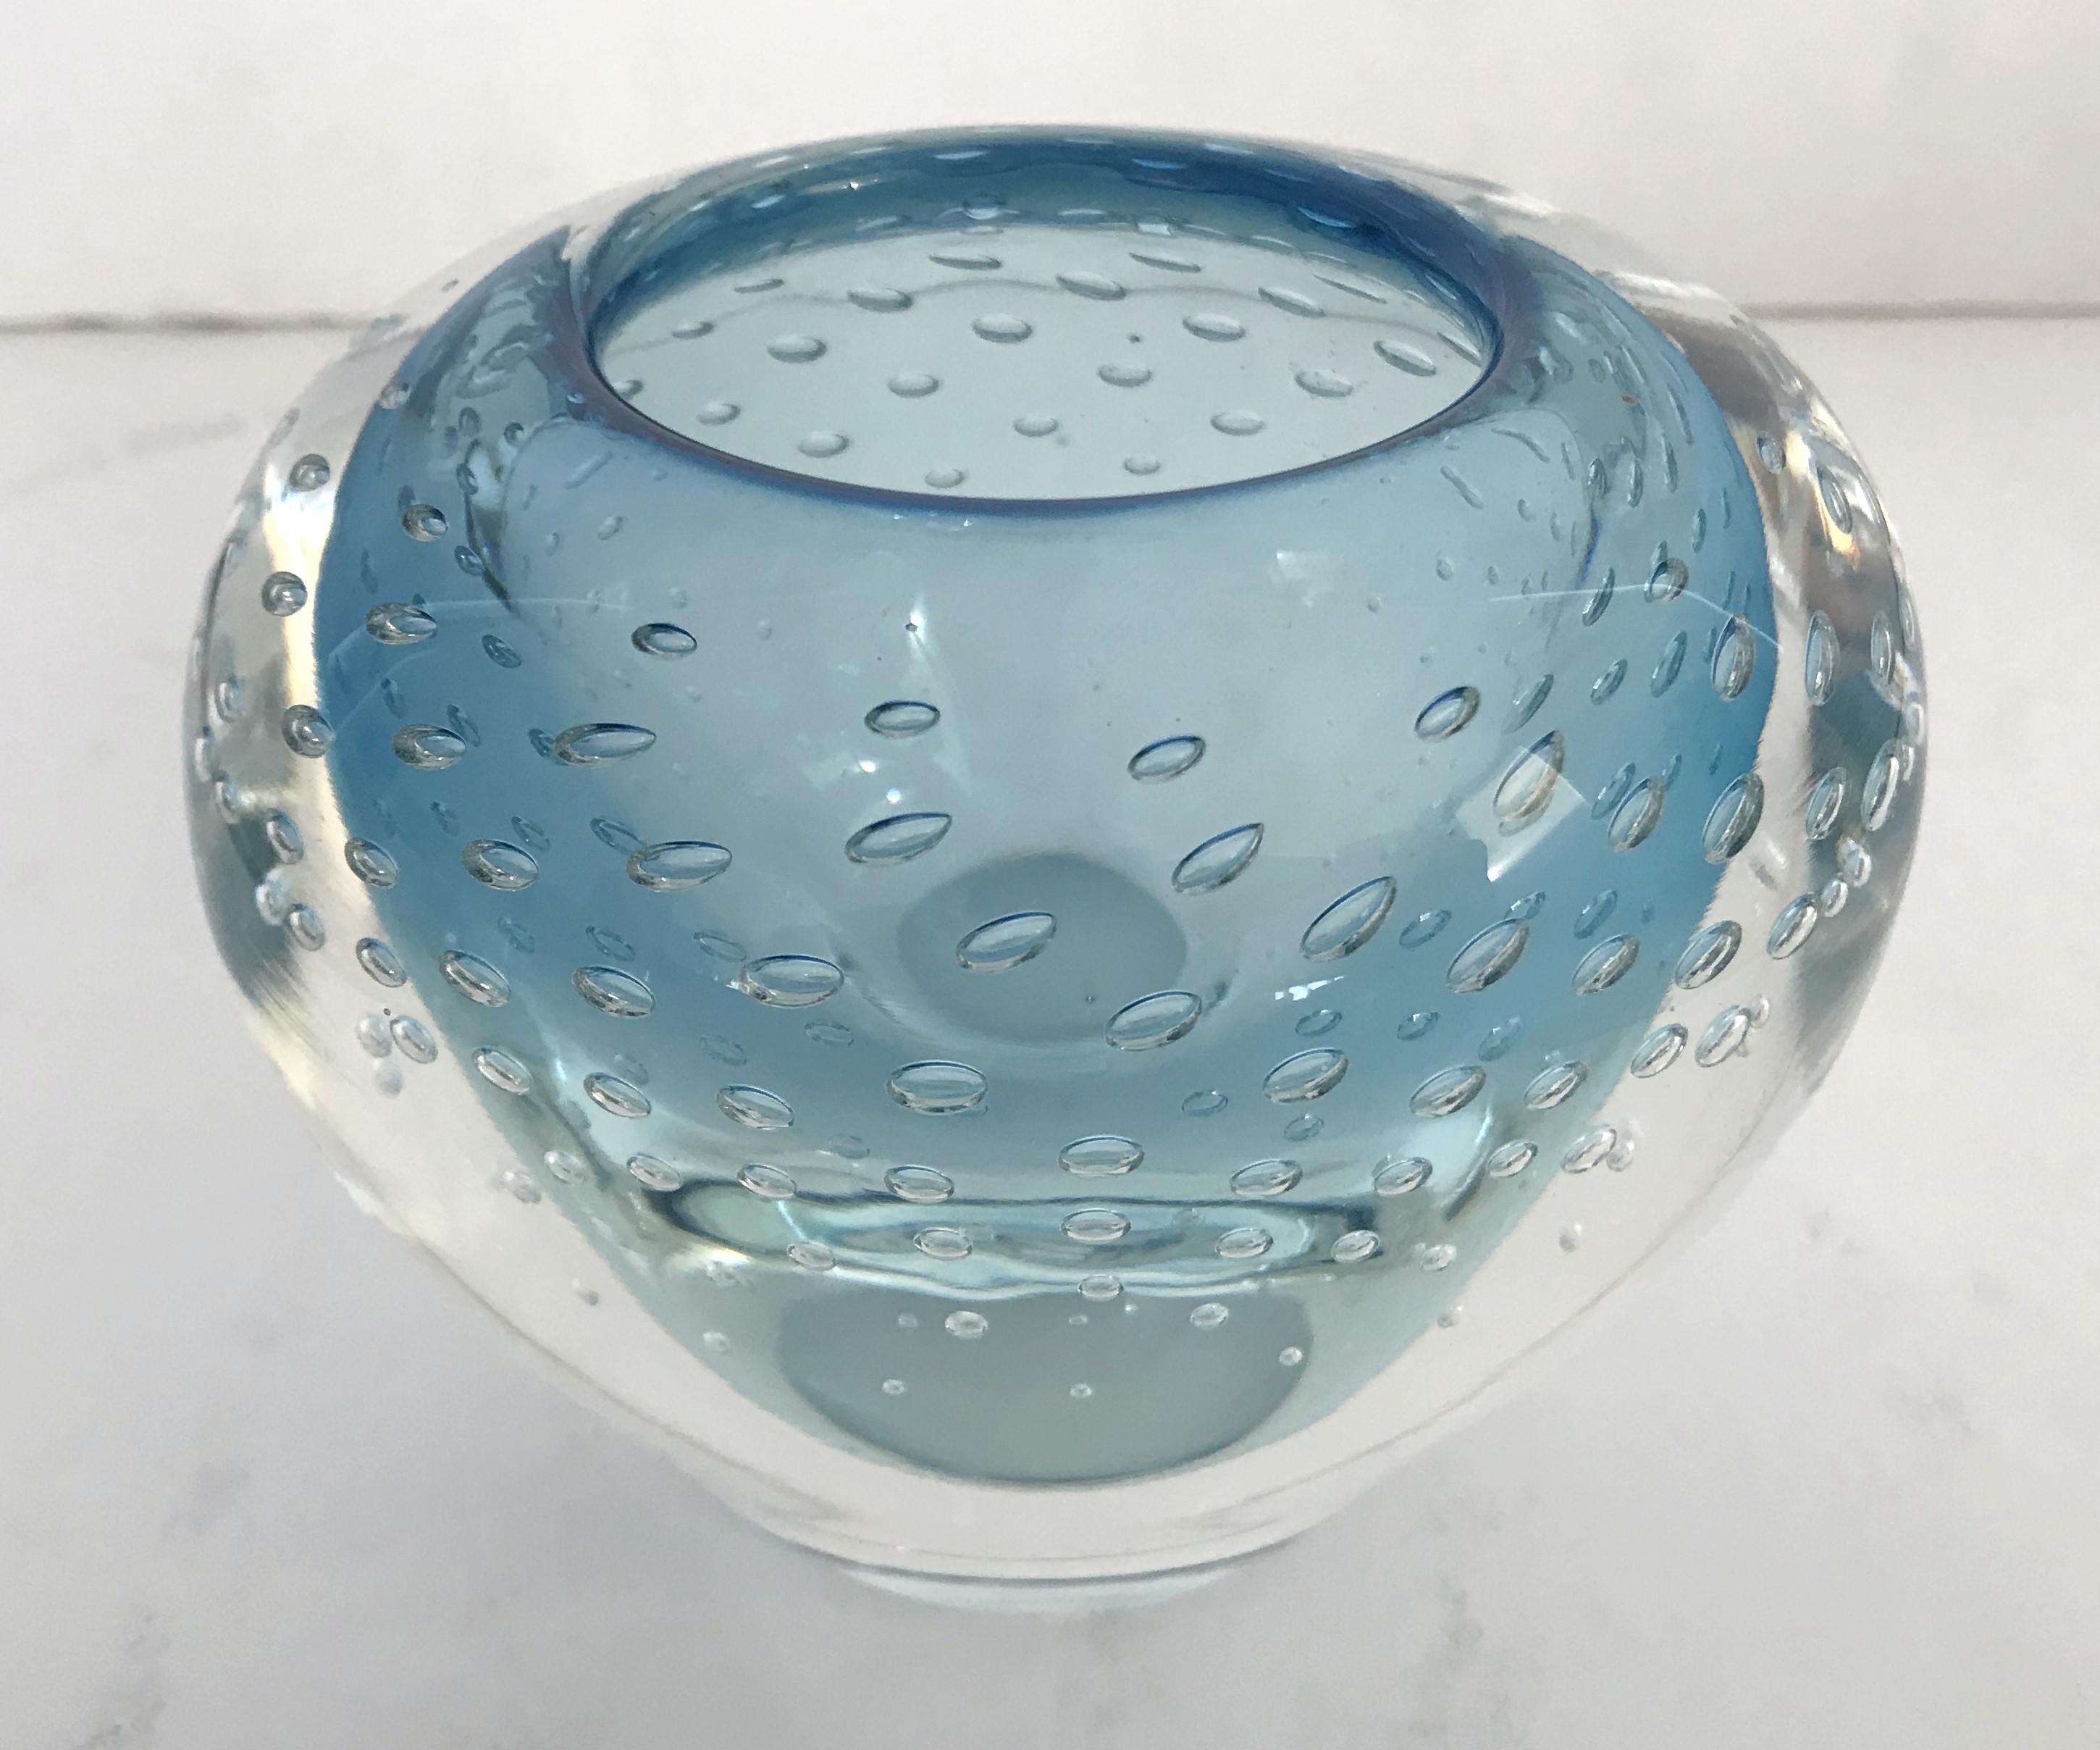 Vintage Italian light blue Murano glass bowl carefully hand blown with small bubbles inside the glass using pulegoso technique / Made in Italy, circa 1960s
Measures: width 5 inches, depth 4.25 inches, height 4 inches
1 in stock in Palm Springs ON